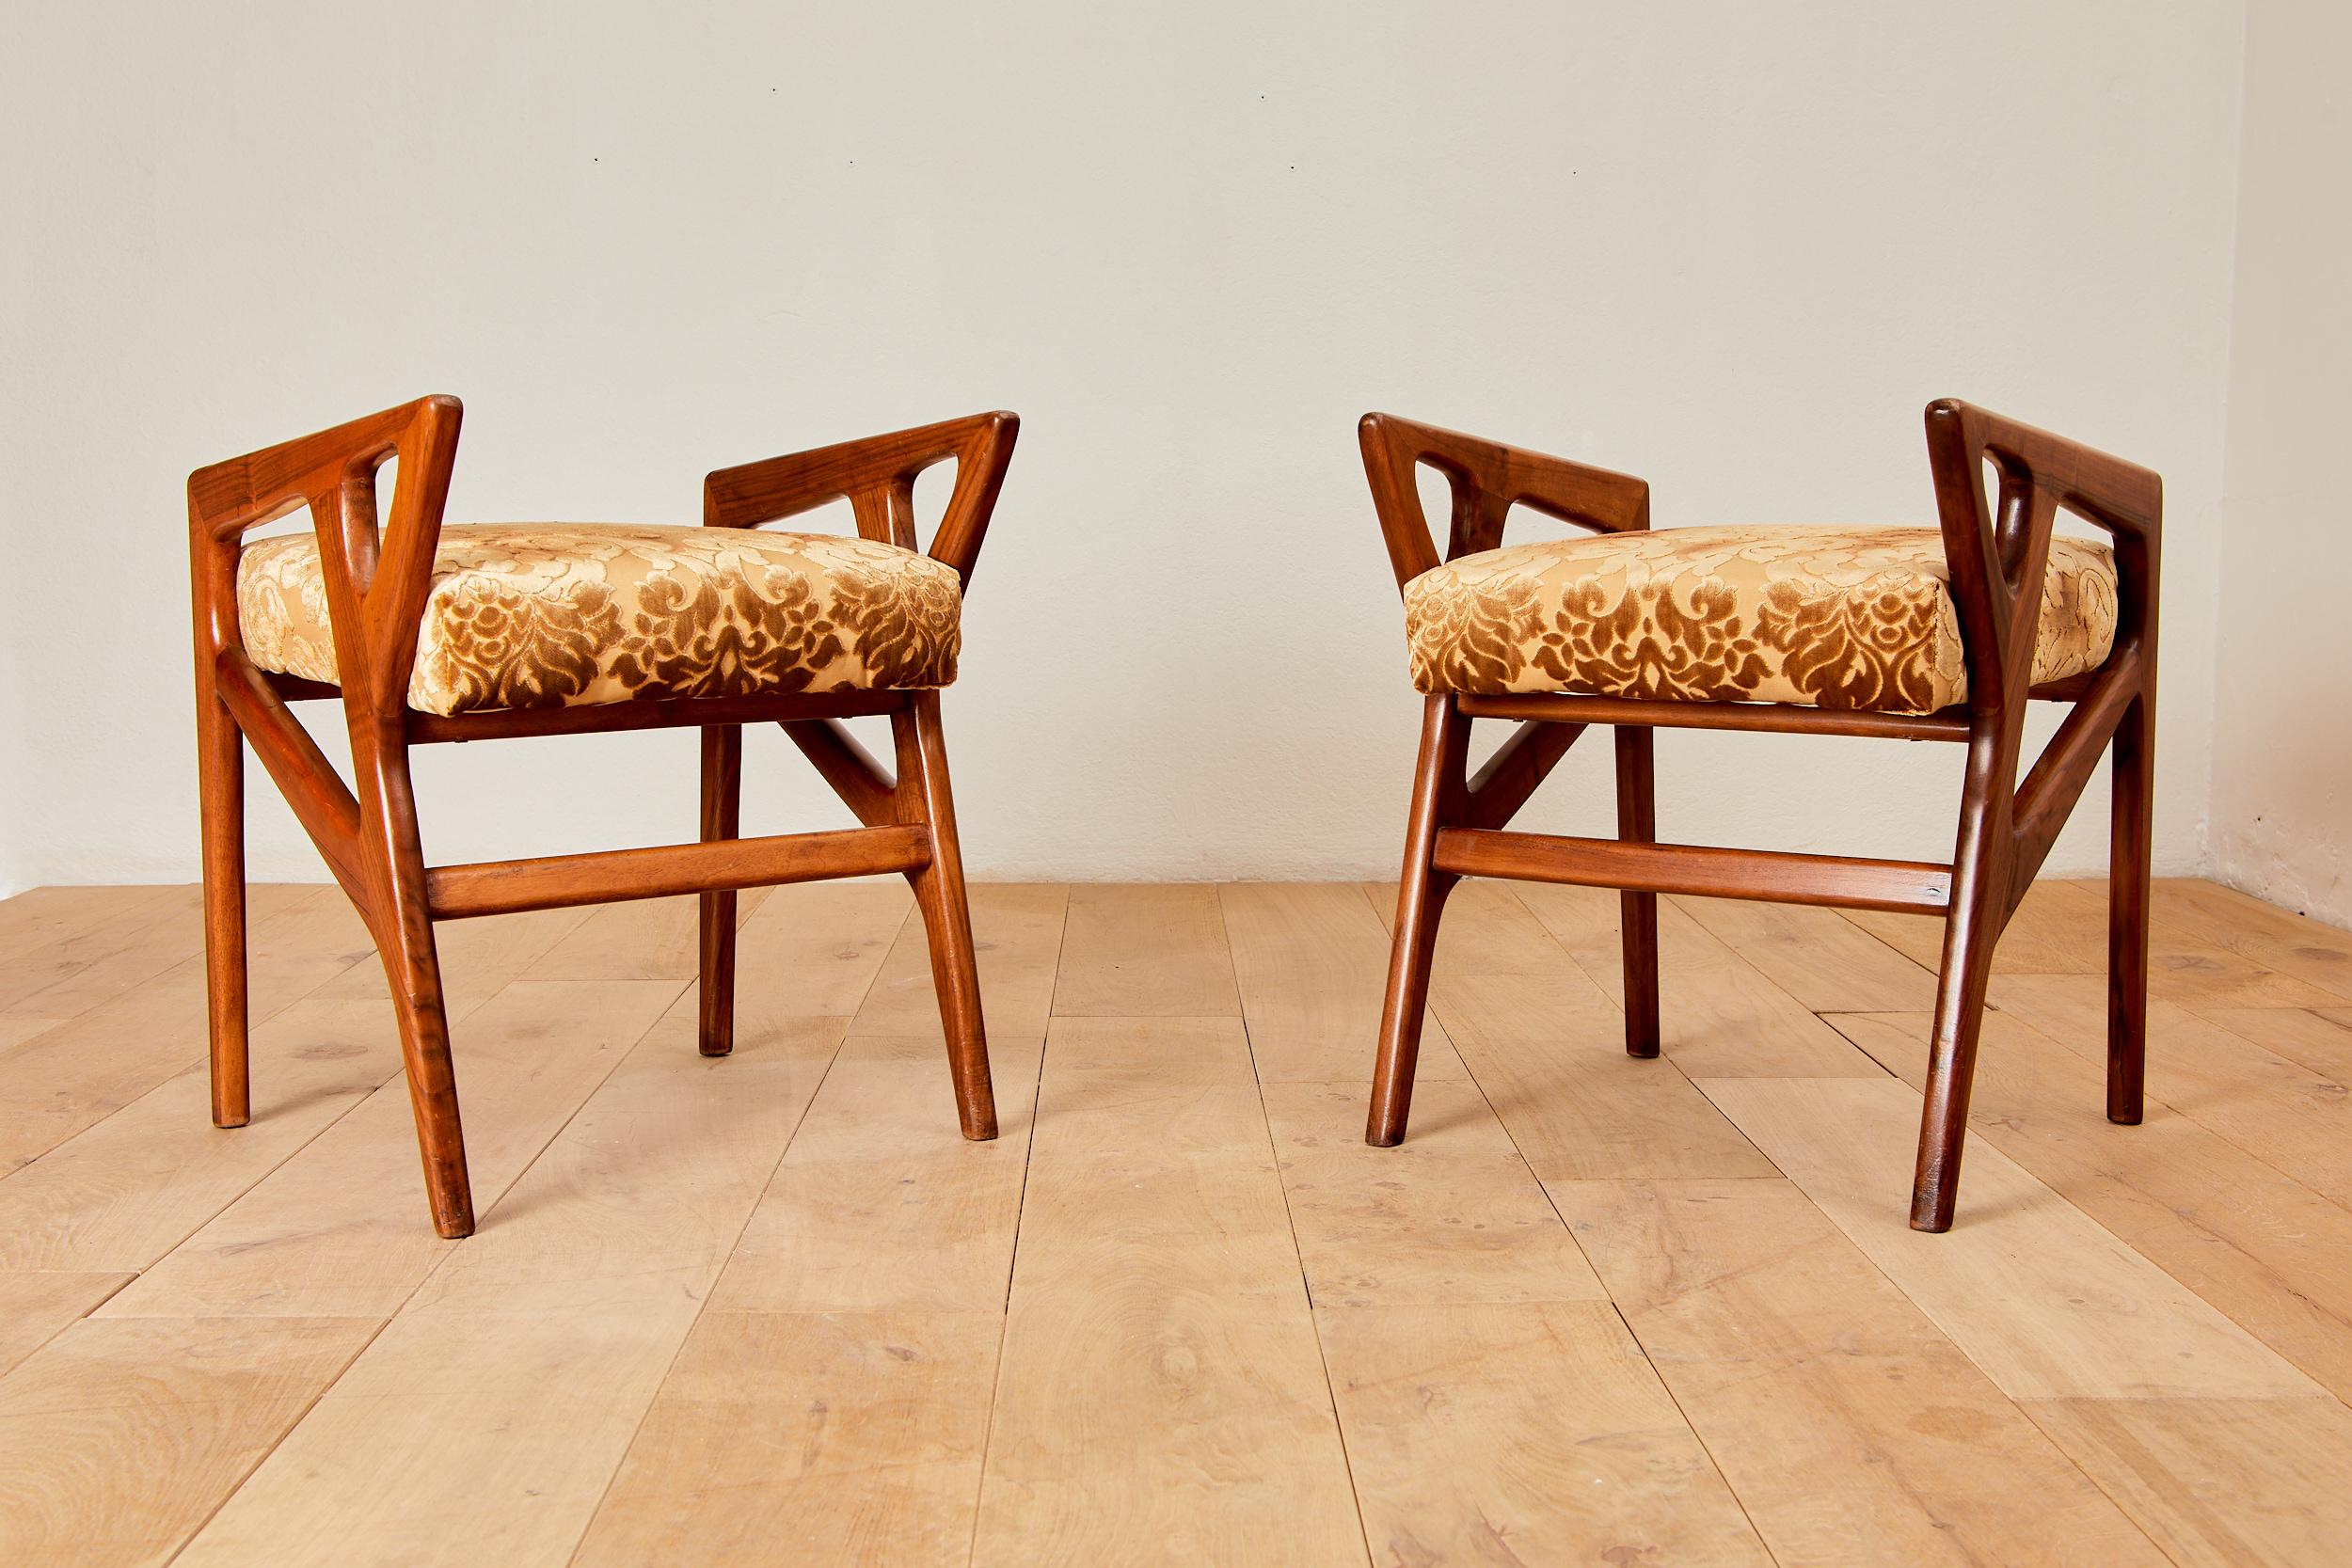 Pair of Gio Ponti 687 arm stools for Cassina, 
wood and fabric,
circa 195, Italy.
Upholstered in fabric and in very good condition.
Length 46 cm, width 45 cm, height 54 cm.